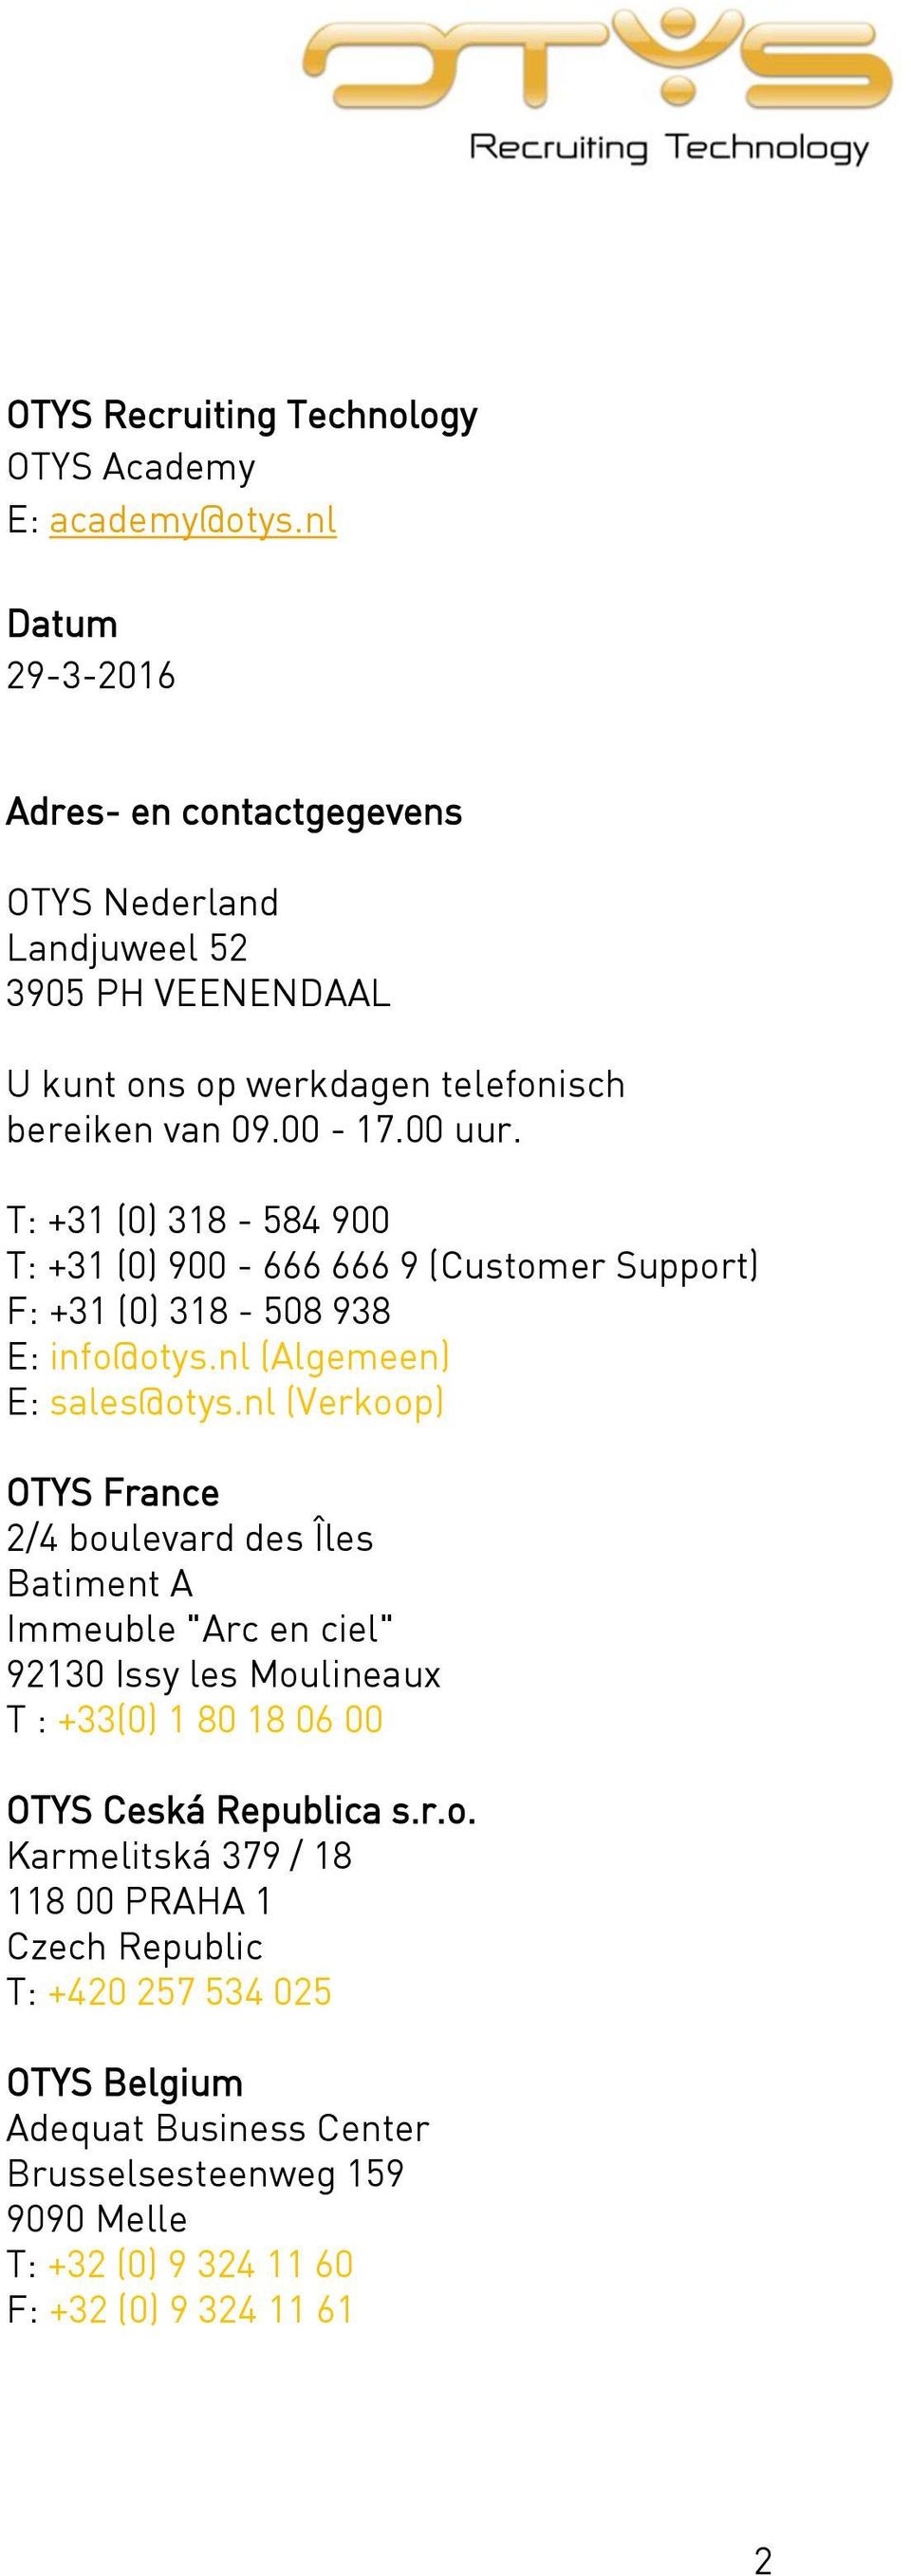 T: +31 (0) 318-584 900 T: +31 (0) 900-666 666 9 (Customer Support) F: +31 (0) 318-508 938 E: info@otys.nl (Algemeen) E: sales@otys.